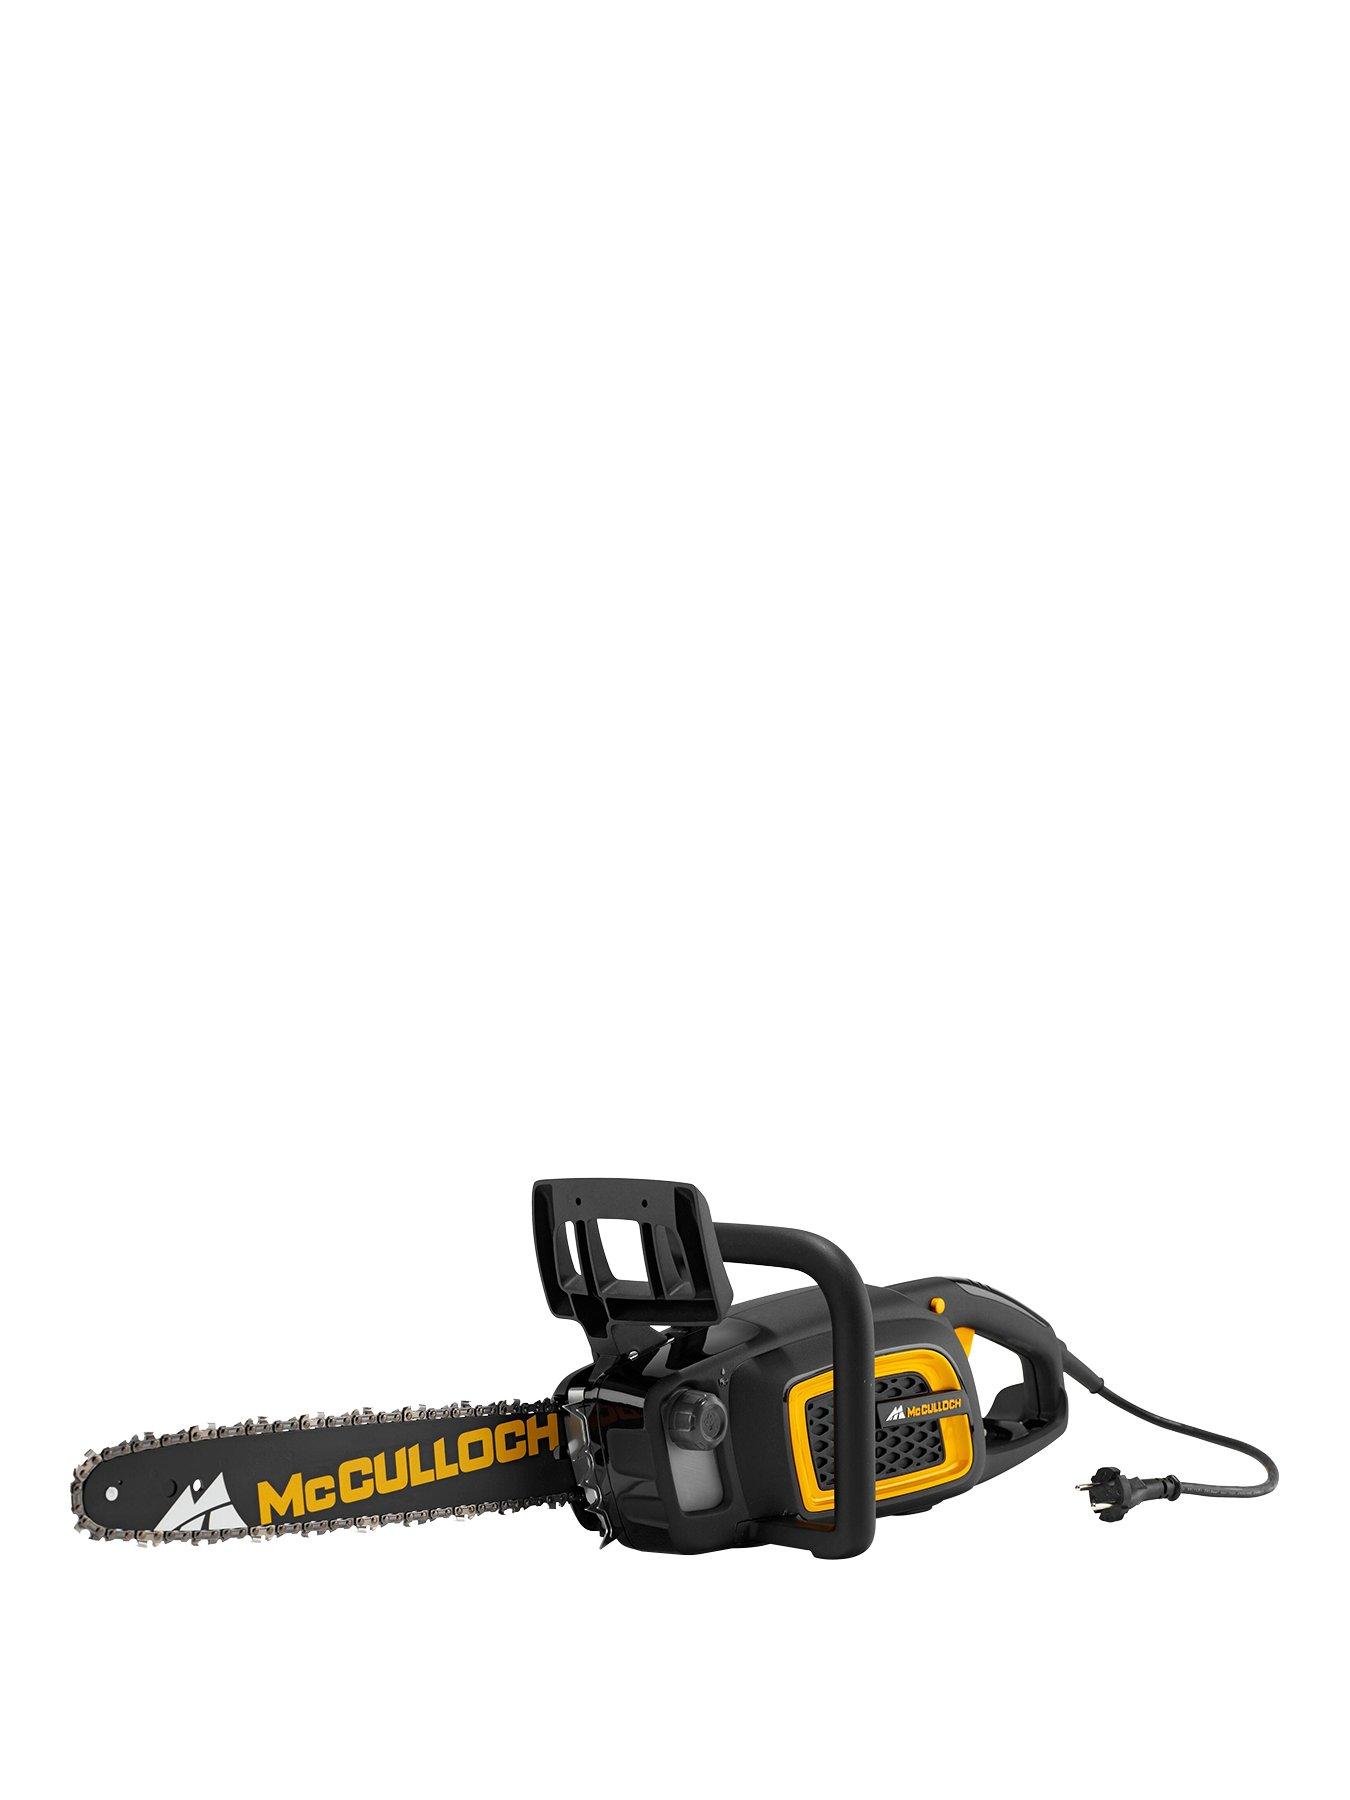 https://media.littlewoods.com/i/littlewoods/UEANT_SQ1_0000000088_NO_COLOR_SLf/mcculloch-cse2040s-electric-chainsaw.jpg?$180x240_retinamobilex2$&$roundel_littlewoods$&p1_img=lw_sale_2018